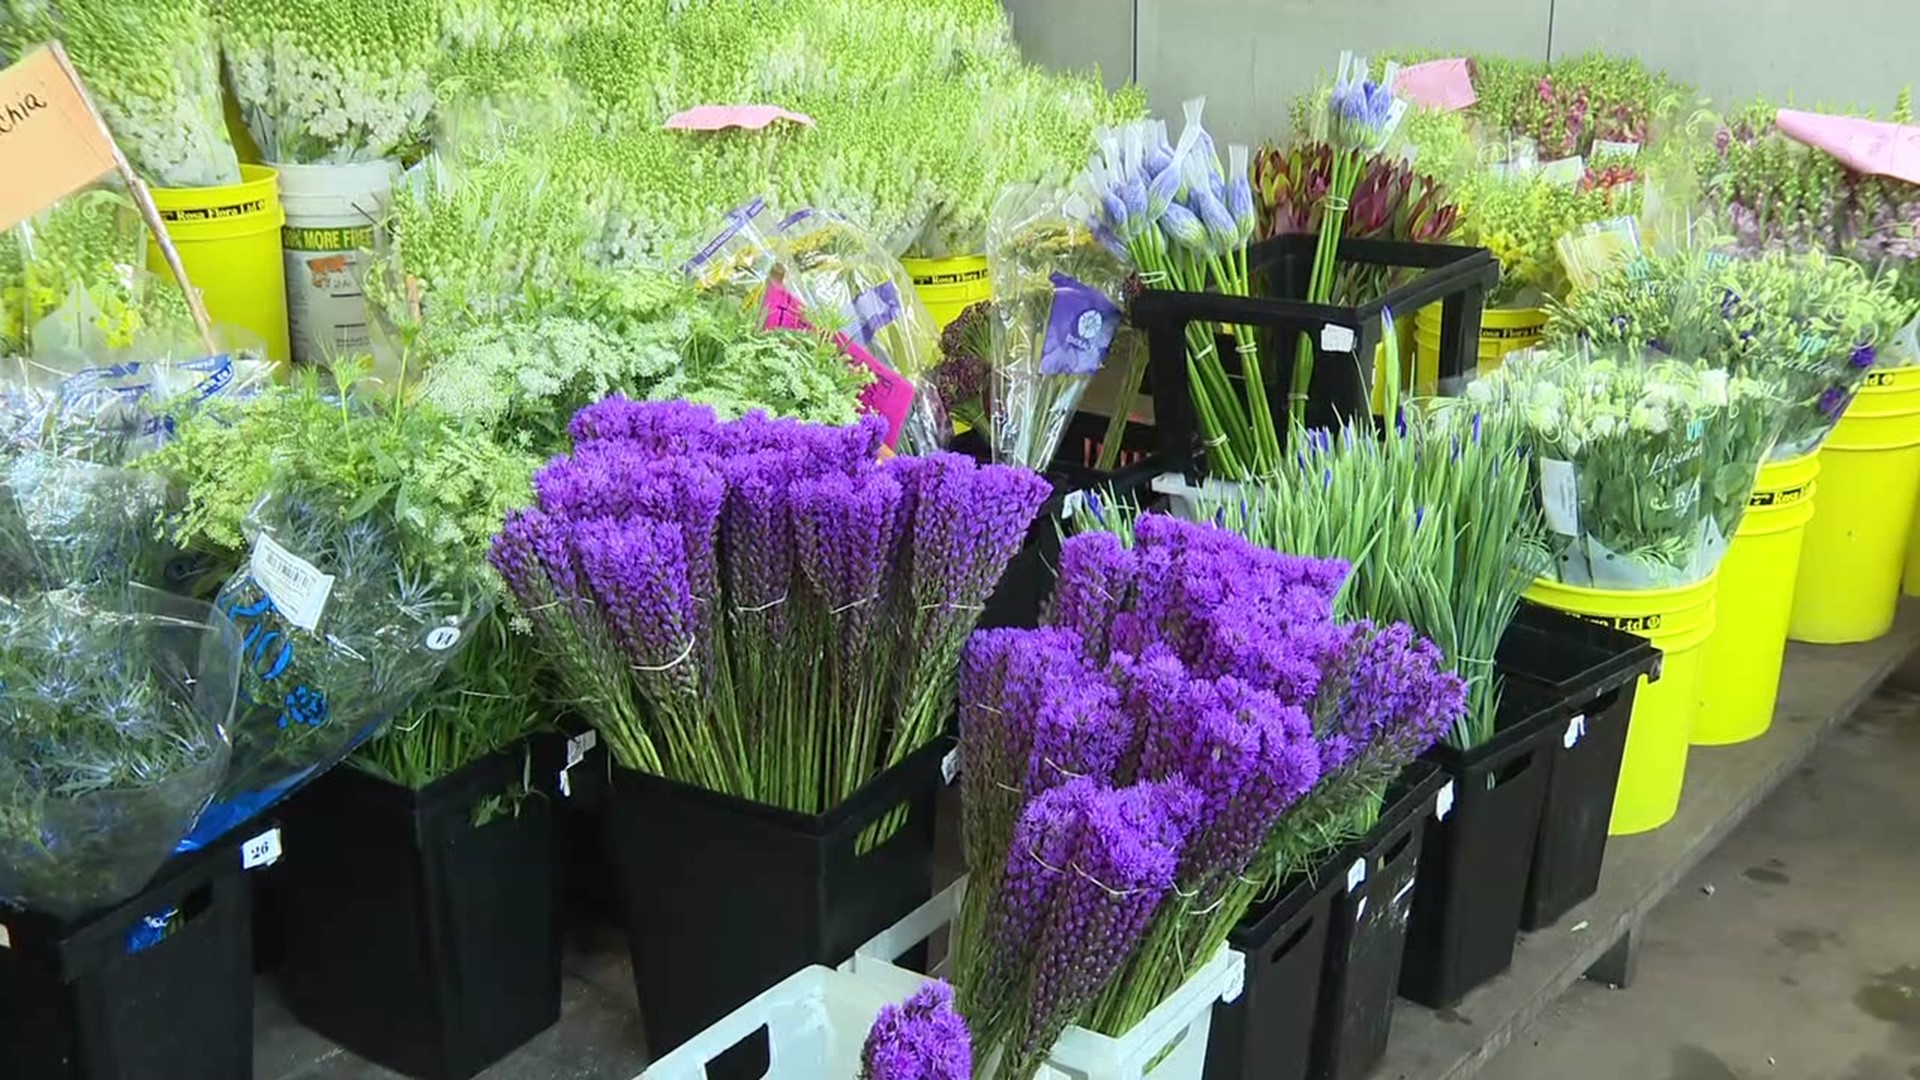 It's crunch time for Dillon Floral in Bloomsburg, a wholesale florist that provides flowers, plants, and accessories to nearly 1,000 retail flower shops.